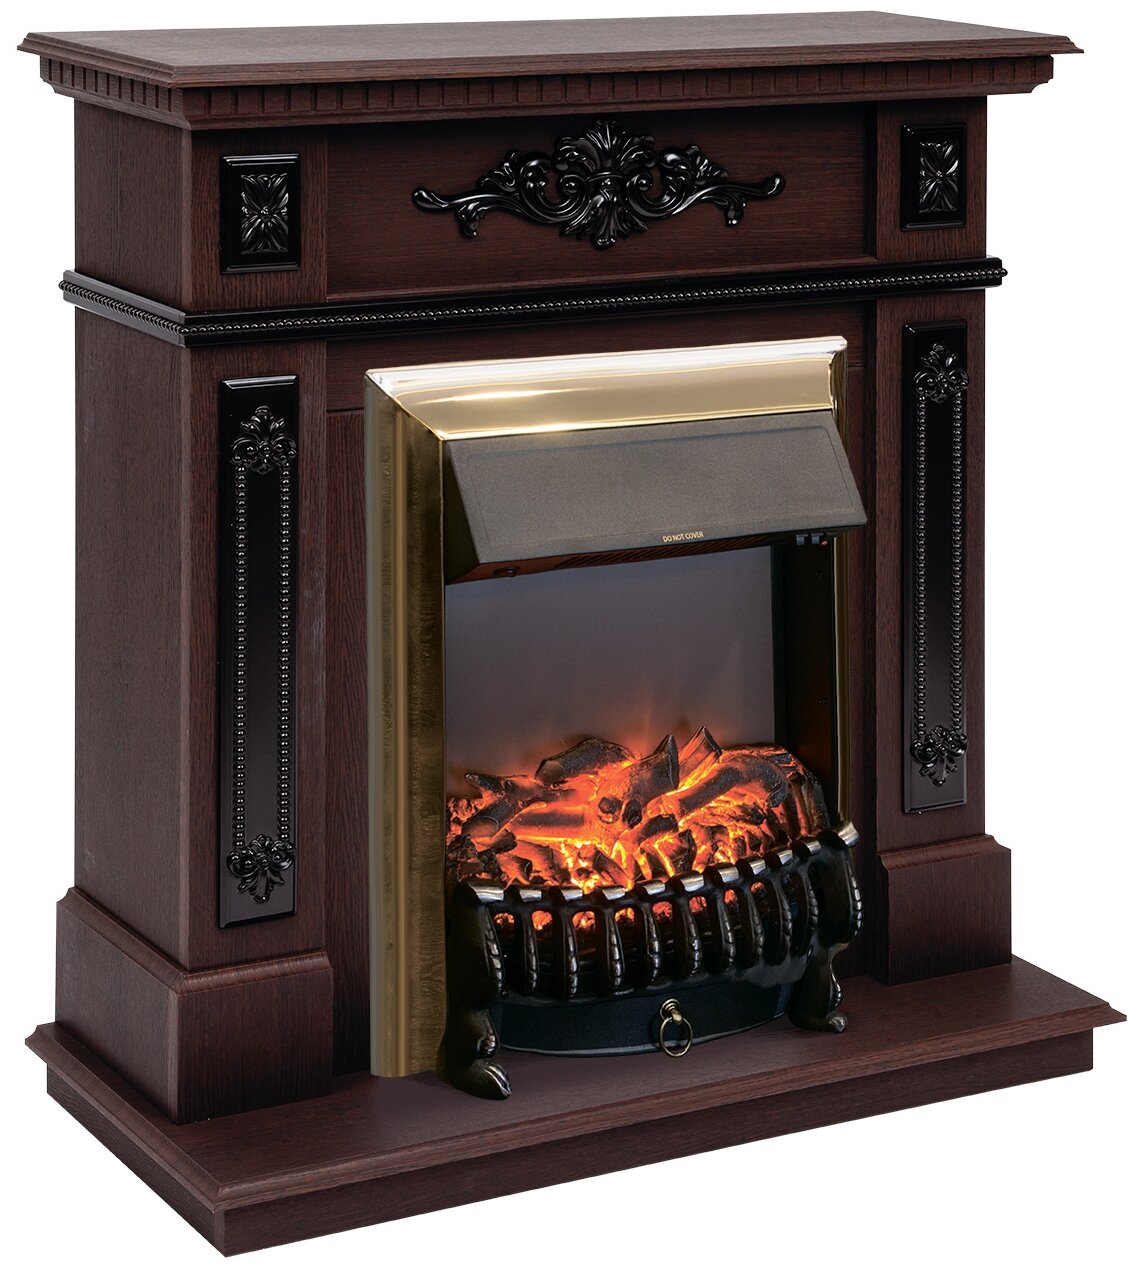 RealFlame Lilian DN + Fobos Lux BR S - 97.5x88.5x37 см